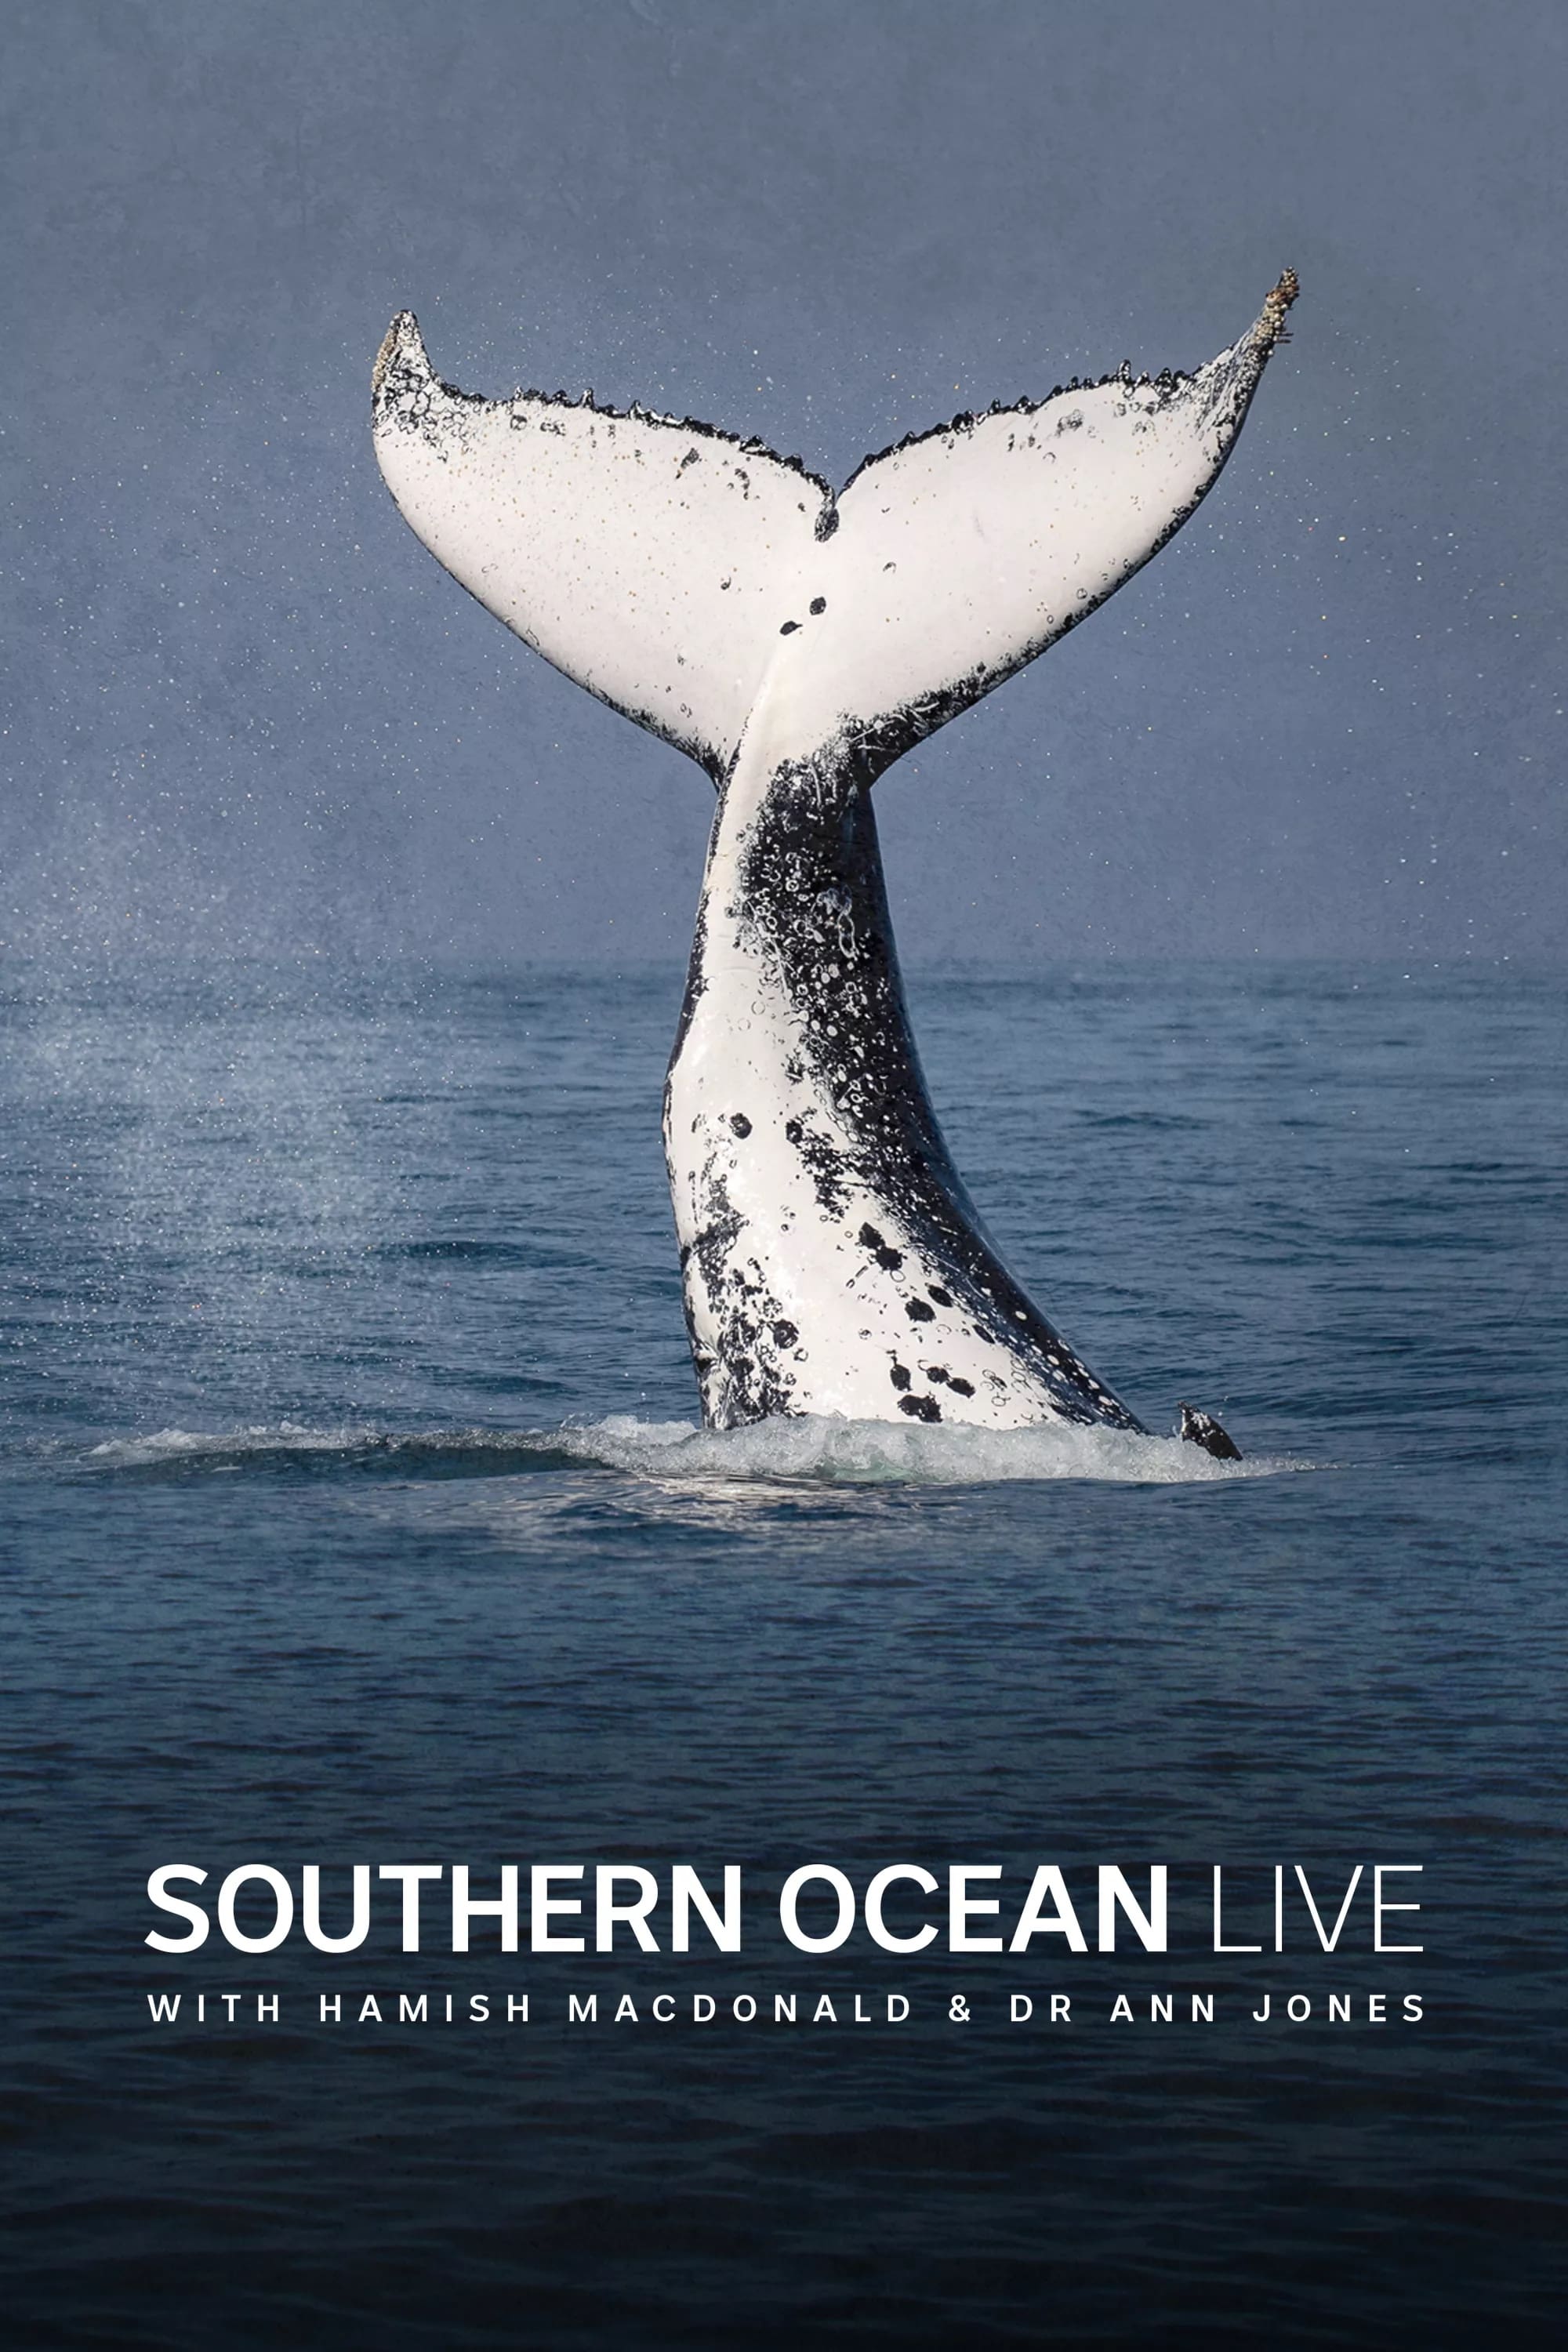 Southern Ocean Live